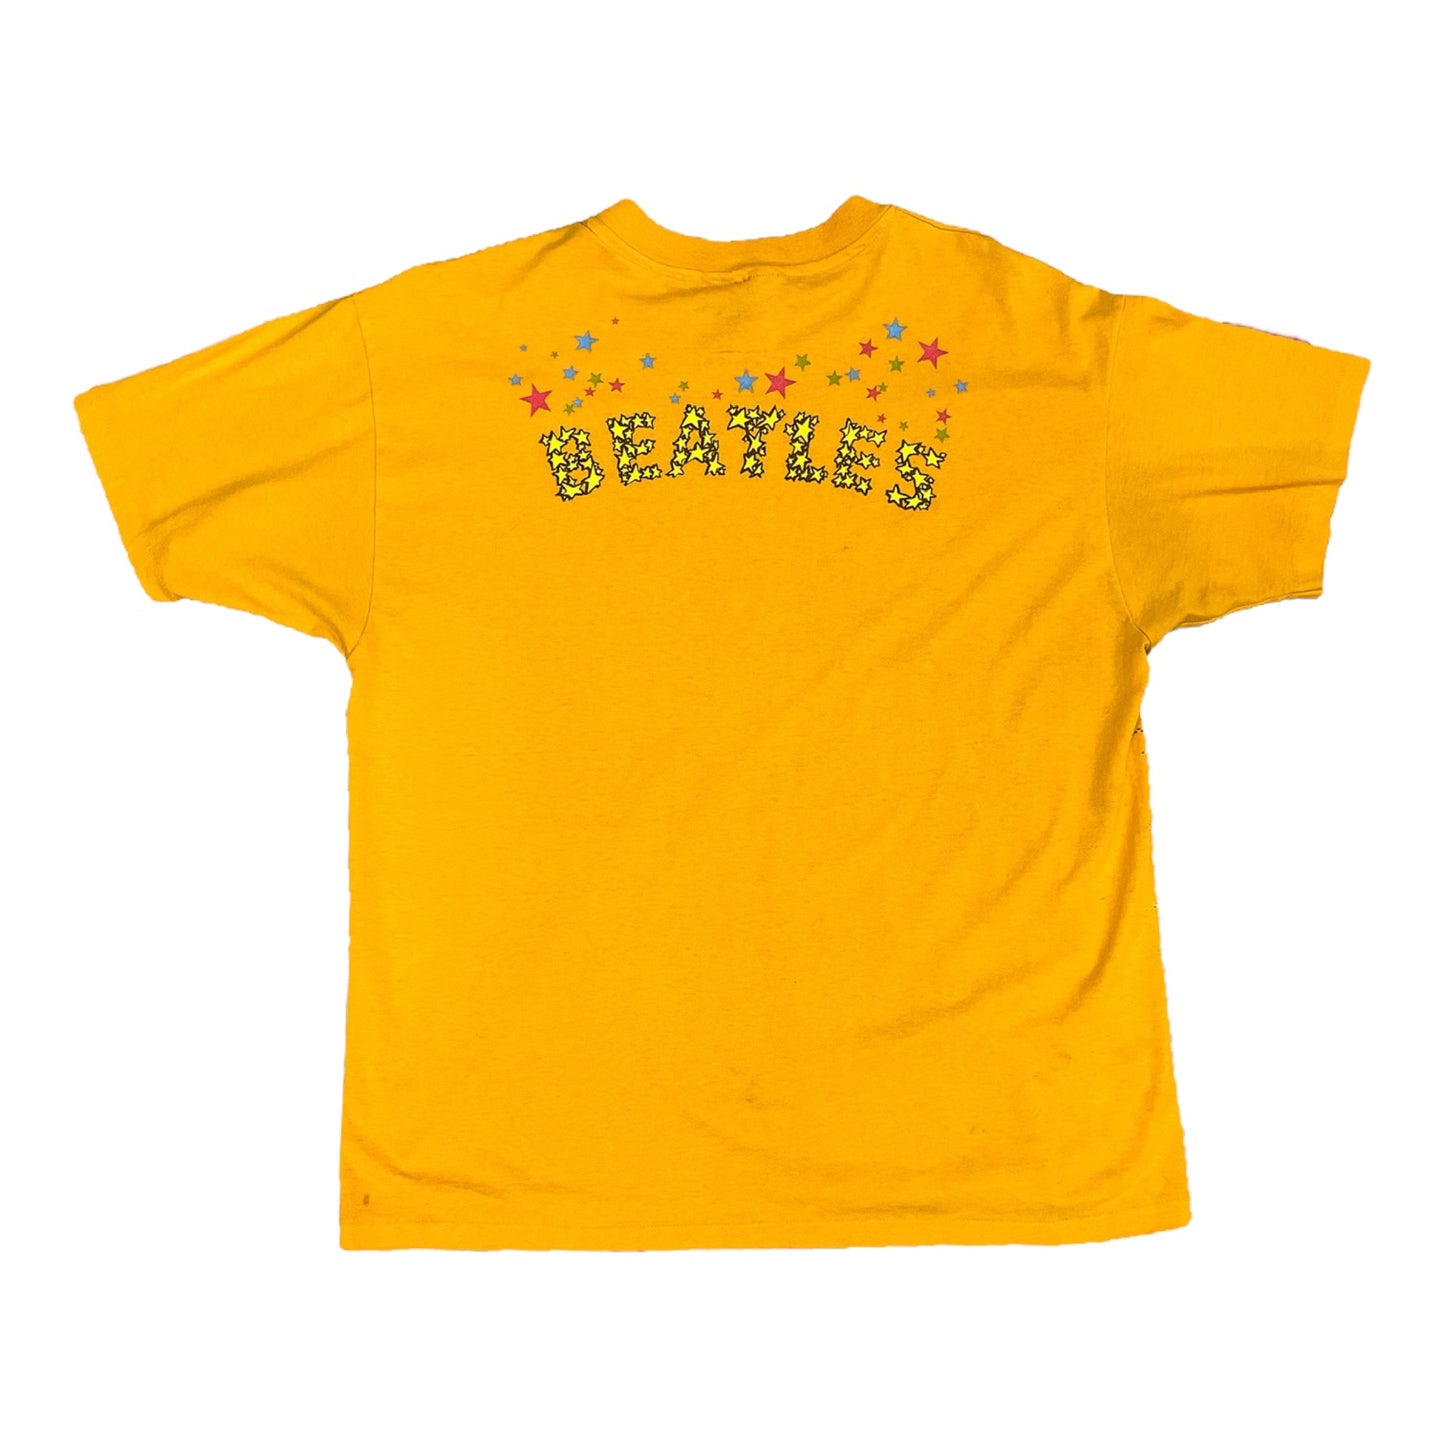 1991 Vintage Beatles all over print band tee